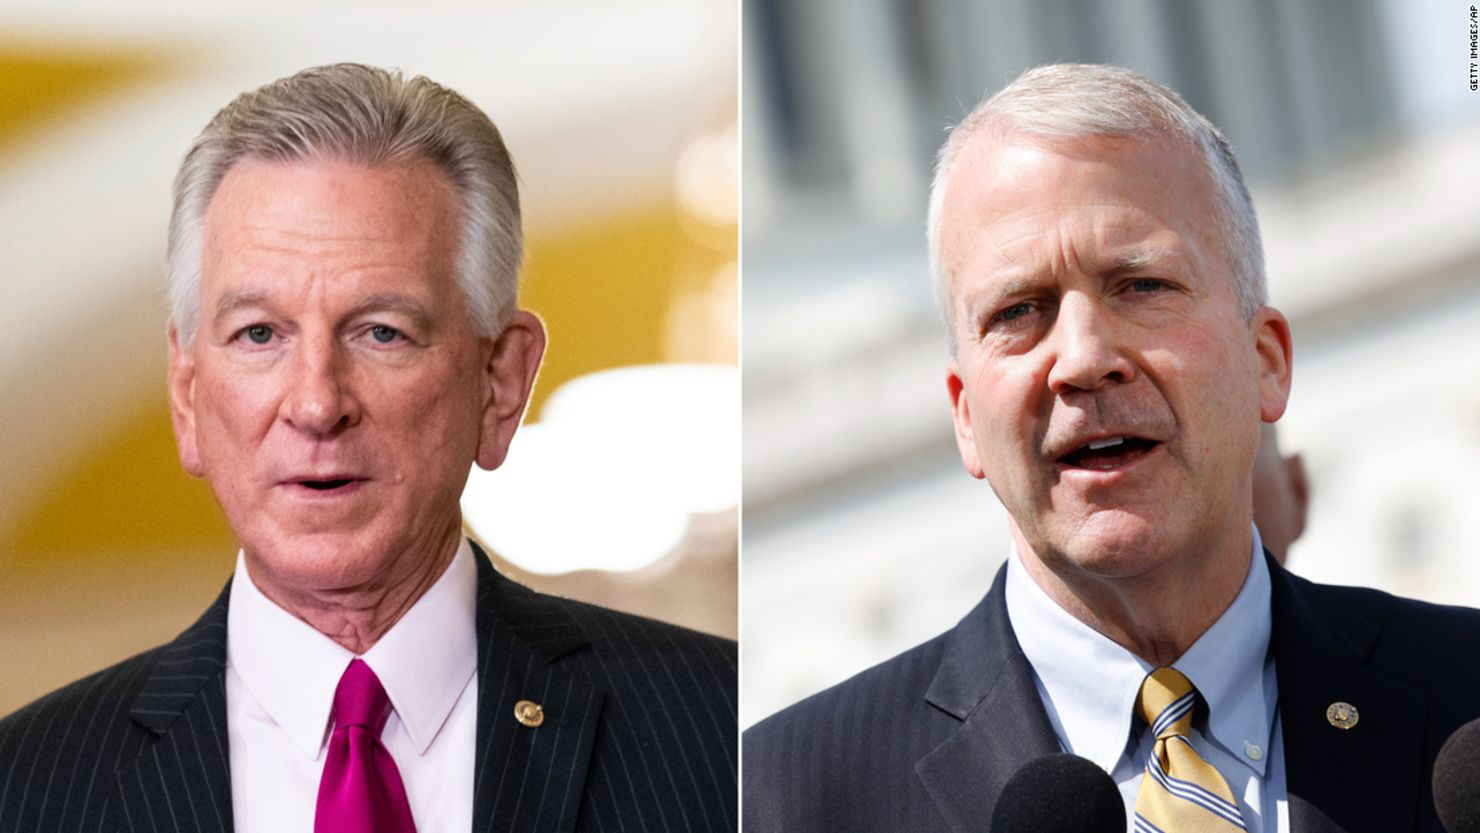 Left - WASHINGTON - SEPTEMBER 21: Sen. Tommy Tuberville, R-Ala., arrives for President of Ukraine Volodymyr Zelenskyy's meeting with U.S. Senators in the Capitol on Thursday, September 21, 2023. (Bill Clark/CQ Roll Call via AP Images)

Right - SHINGTON, DC - MAY 11: Sen. Dan Sullivan (R-AK) speaks on border security and Title 42 during a press conference at the U.S. Capitol on May 11, 2023 in Washington, DC. With the expiration of Title 42, the COVID-era public health emergency that allows for the quick expulsion of migrants, the southern border is expected to see a surge in asylum seekers. (Photo by Kevin Dietsch/Getty Images)